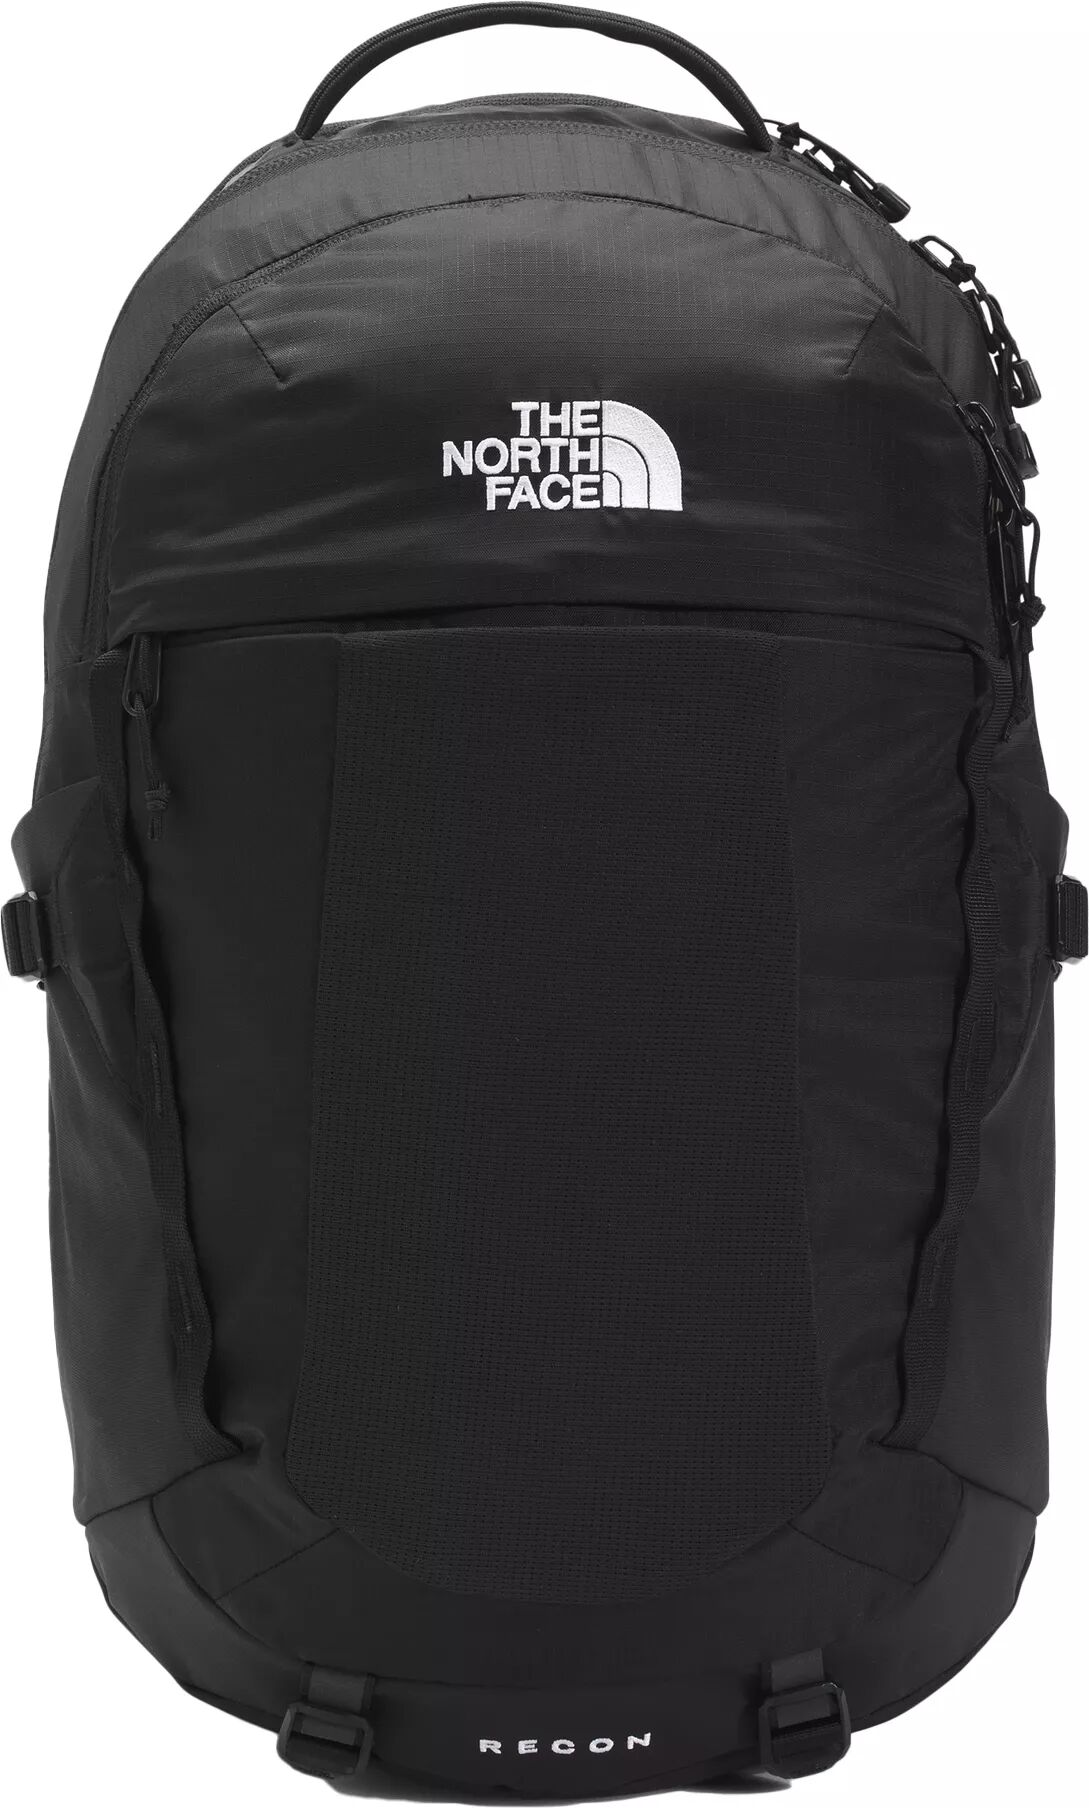 Photos - Backpack The North Face Women's Recon , Black 21tnowwrcnlx21xxxtrv 